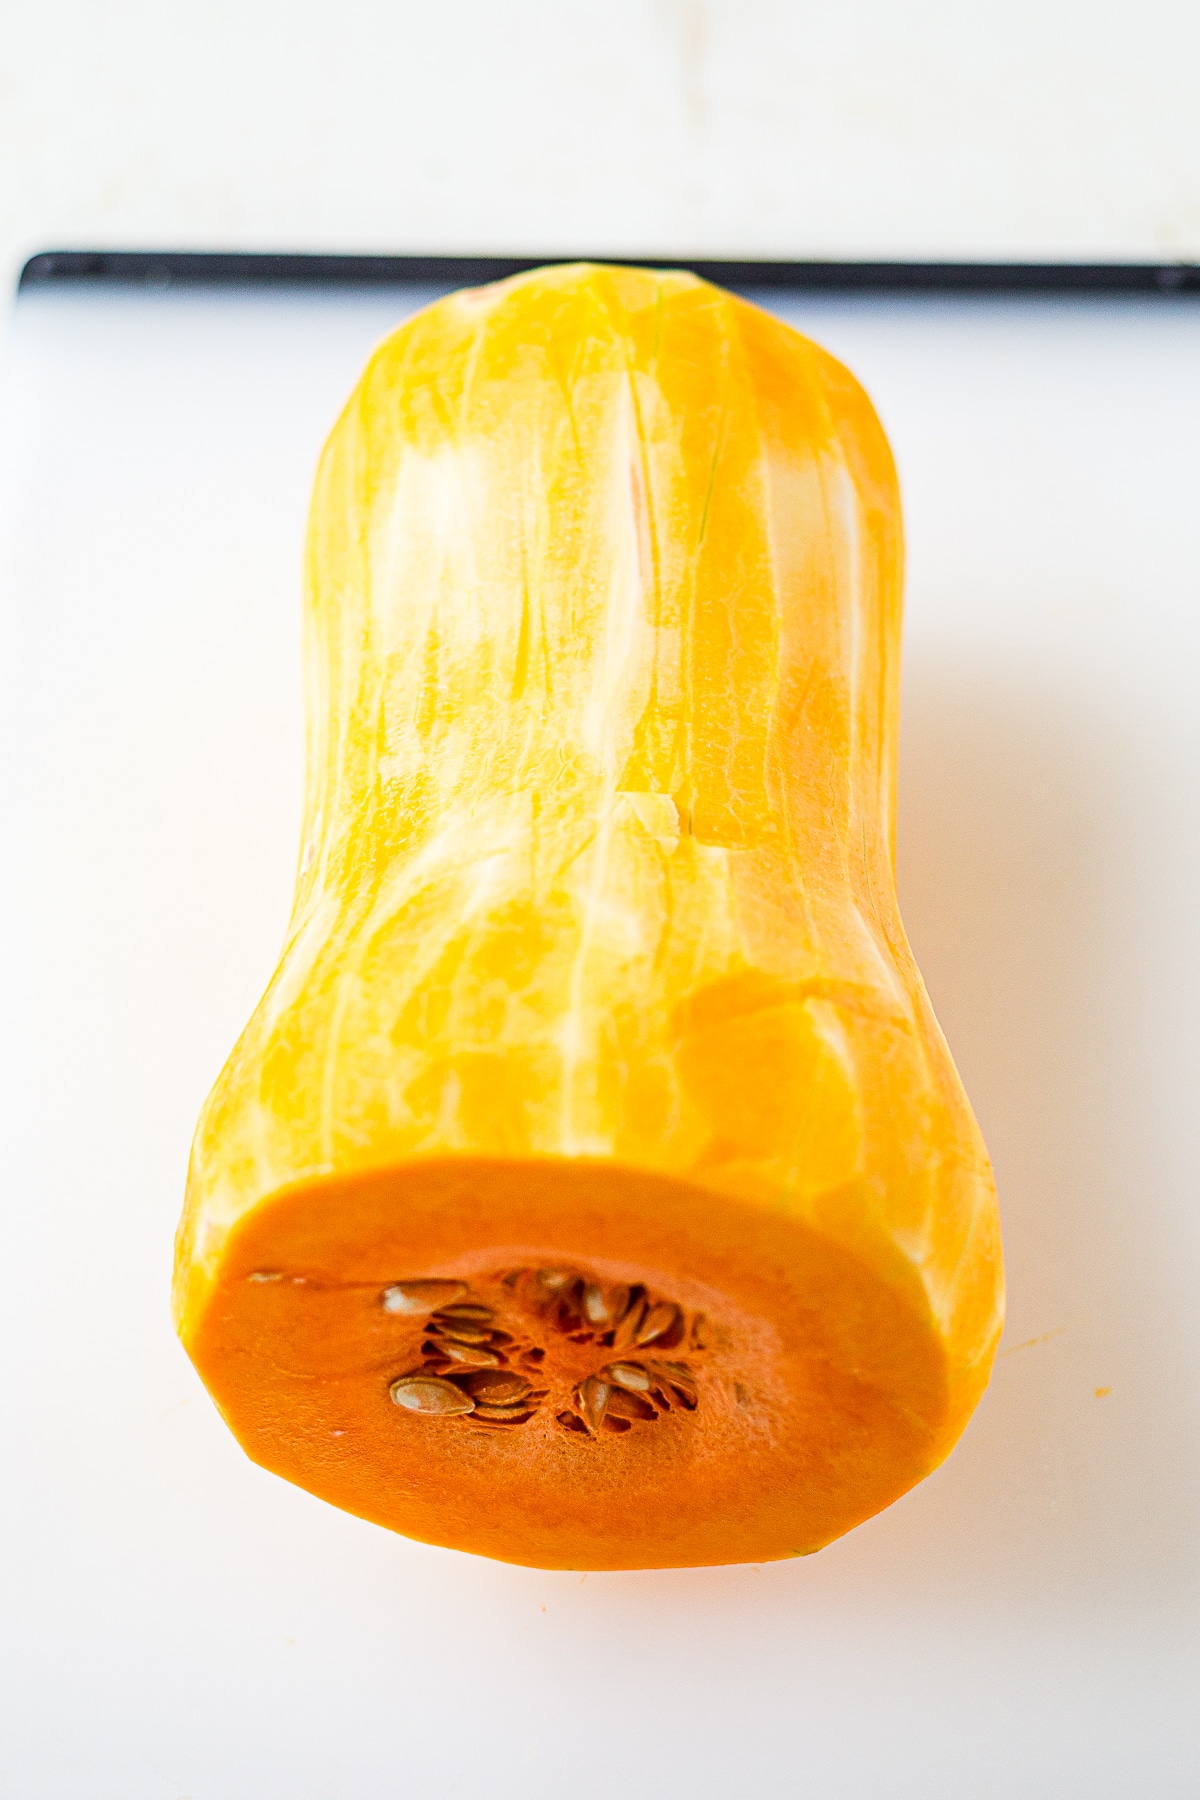 butternut squash with the skin peeled off